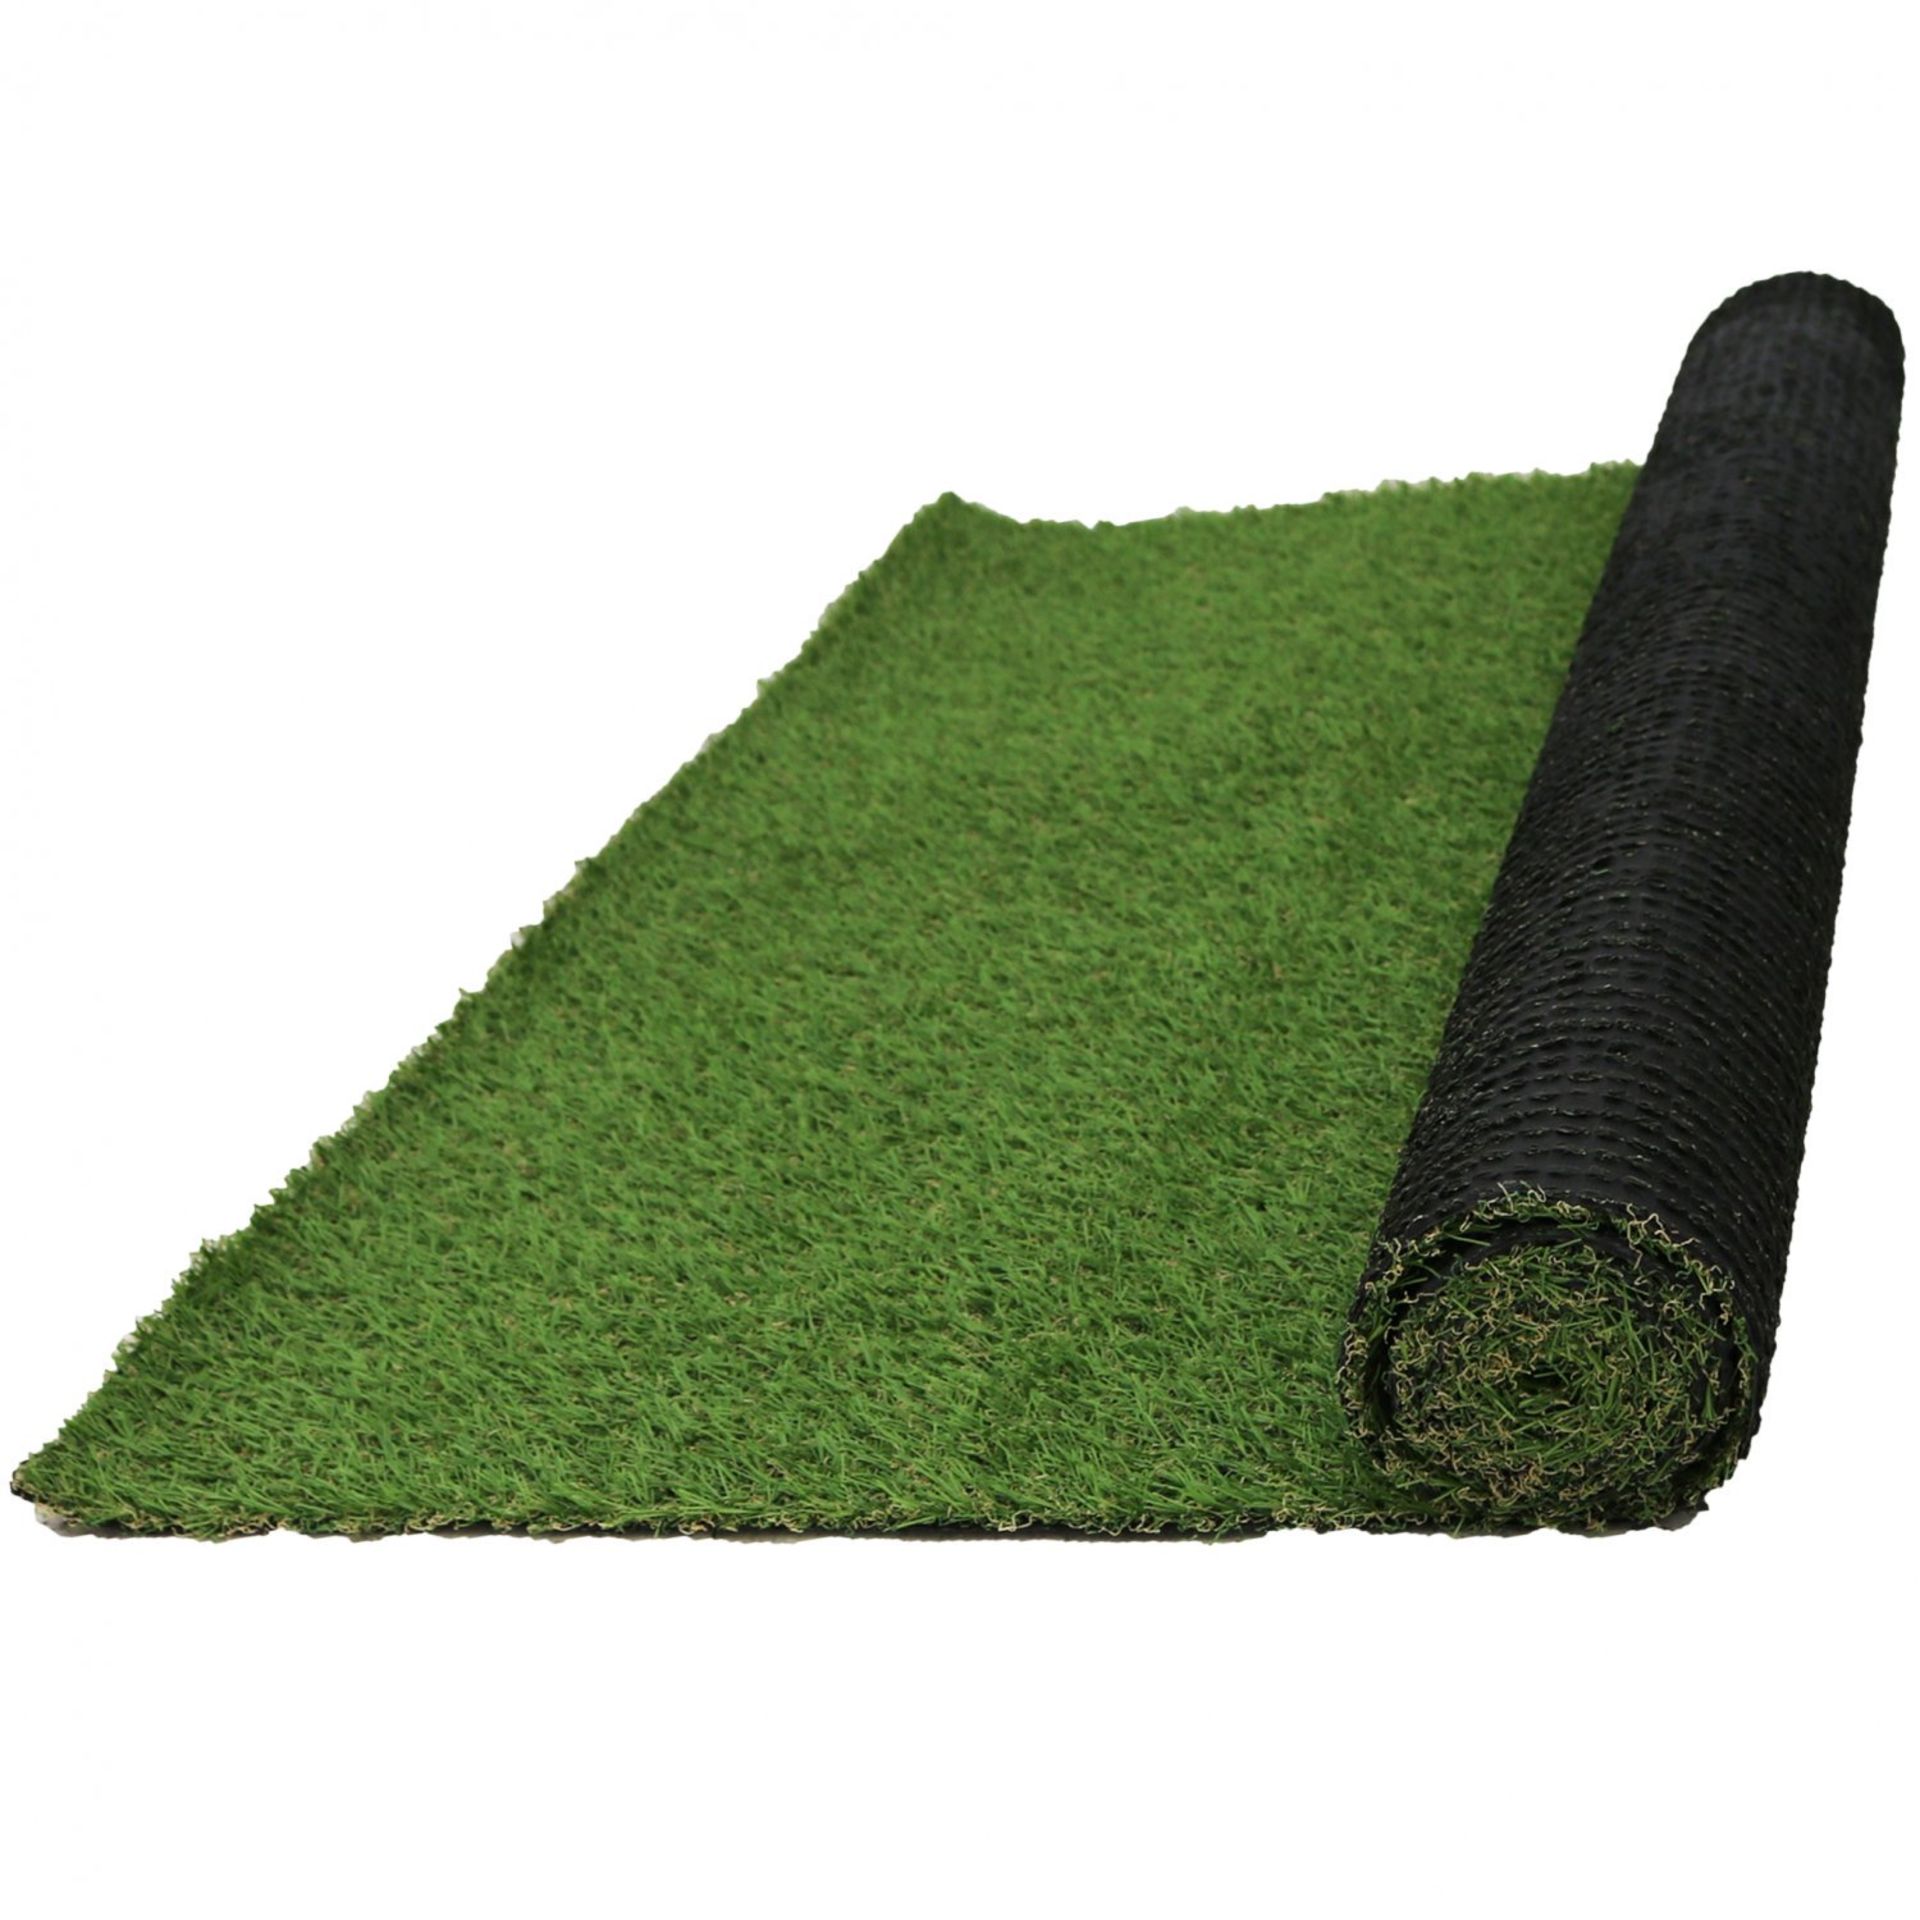 (F41) 17mm Artificial Grass Mat 6ft x 3ft Greengrocers Fake Turf Lawn Quality Water Resistan...